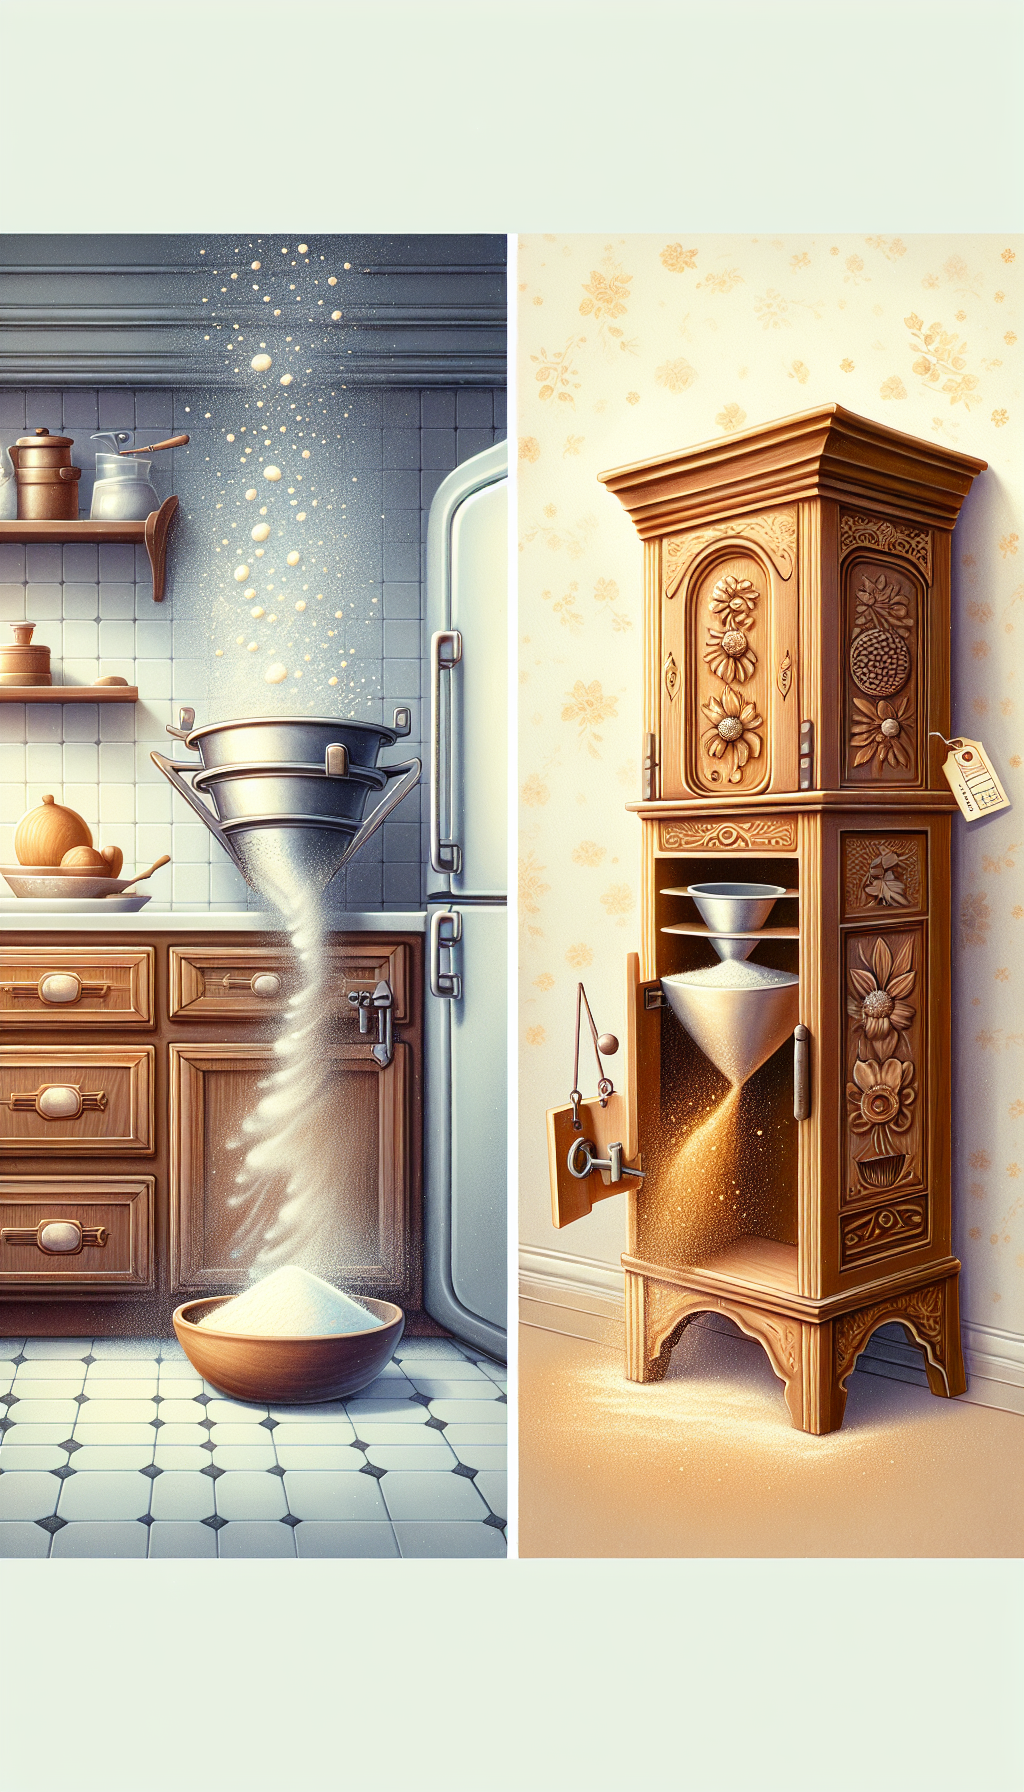 An illustration split in a whimsical, diptych style: on one side, a sleek, modern kitchen, with a clear, ghosted outline of a built-in flour sifter in action, flour floating like magic; on the other, an antique Hoosier cabinet, warm wood tones, with its sifter prominent, golden flour dust catching the light, and a price tag bearing a hefty value.